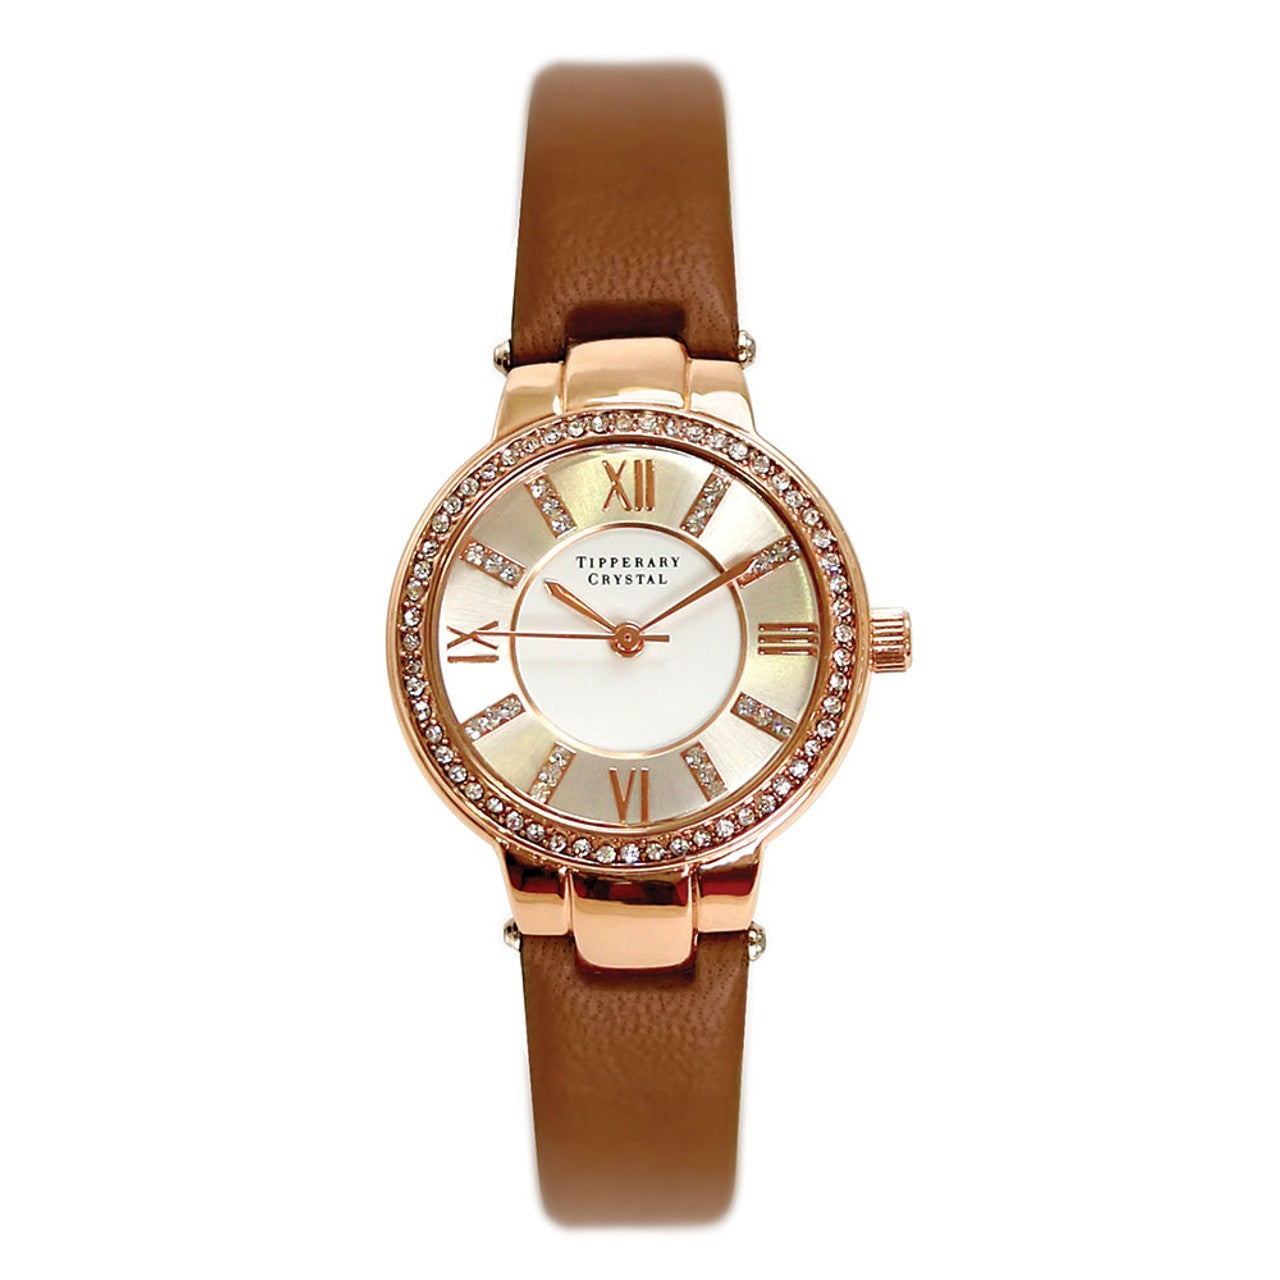 CONTINUANCE ROSE GOLD LADIES WATCH WITH LEATHER STRAP